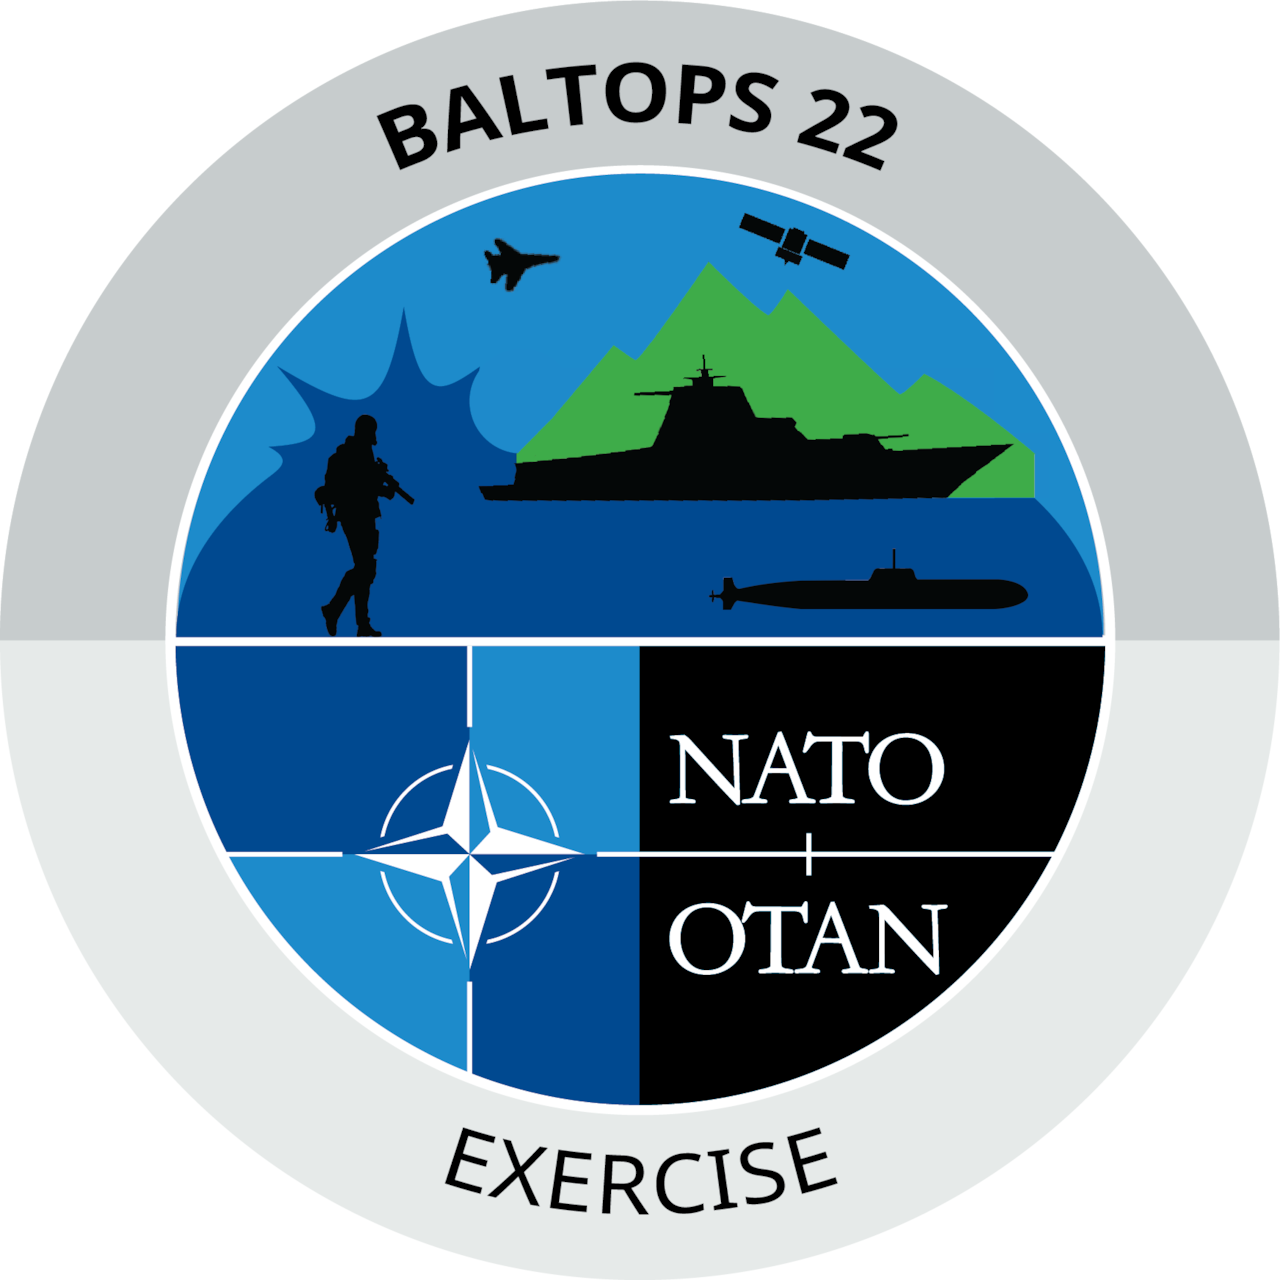 Baltic Operations (BALTOPS) 22, the 51st iteration of the premier maritime-focused exercise in the Baltic Region, takes place from June 5-17. Fourteen NATO nations, two Partner nations, over 45 maritime units, more than 75 aircraft, and approximately 7,000 personnel will participate in BALTOPS 22. BALTOPS 22 provides a unique training opportunity that strengthens combined response capabilities critical to maintaining freedom of navigation, and preserving regional security and stability.